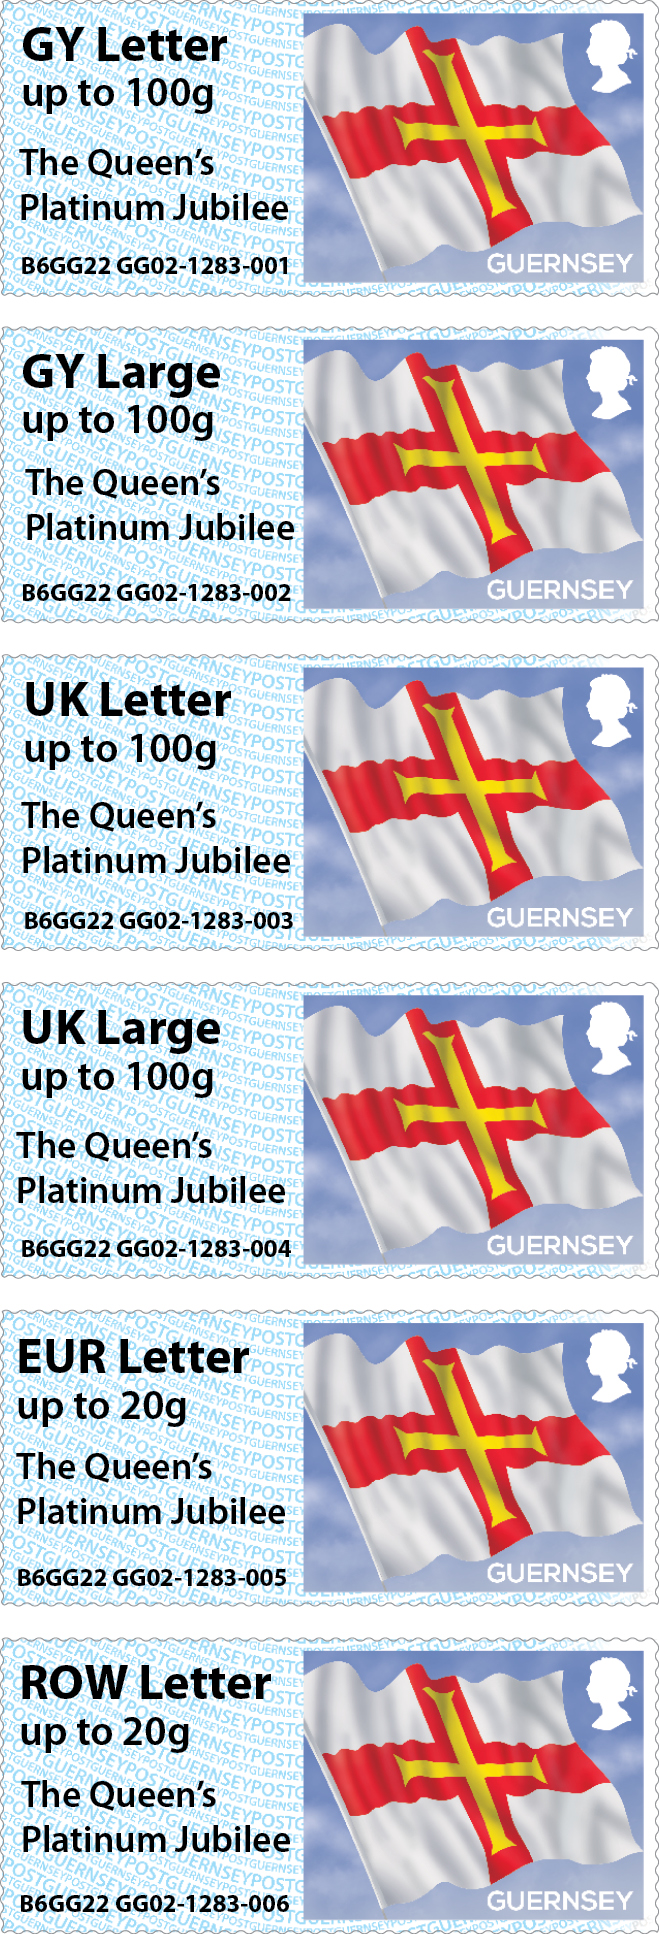 Guernsey will celebrate The Queen’s Platinum Jubilee with an overprint on Post and Go Flag stamps 